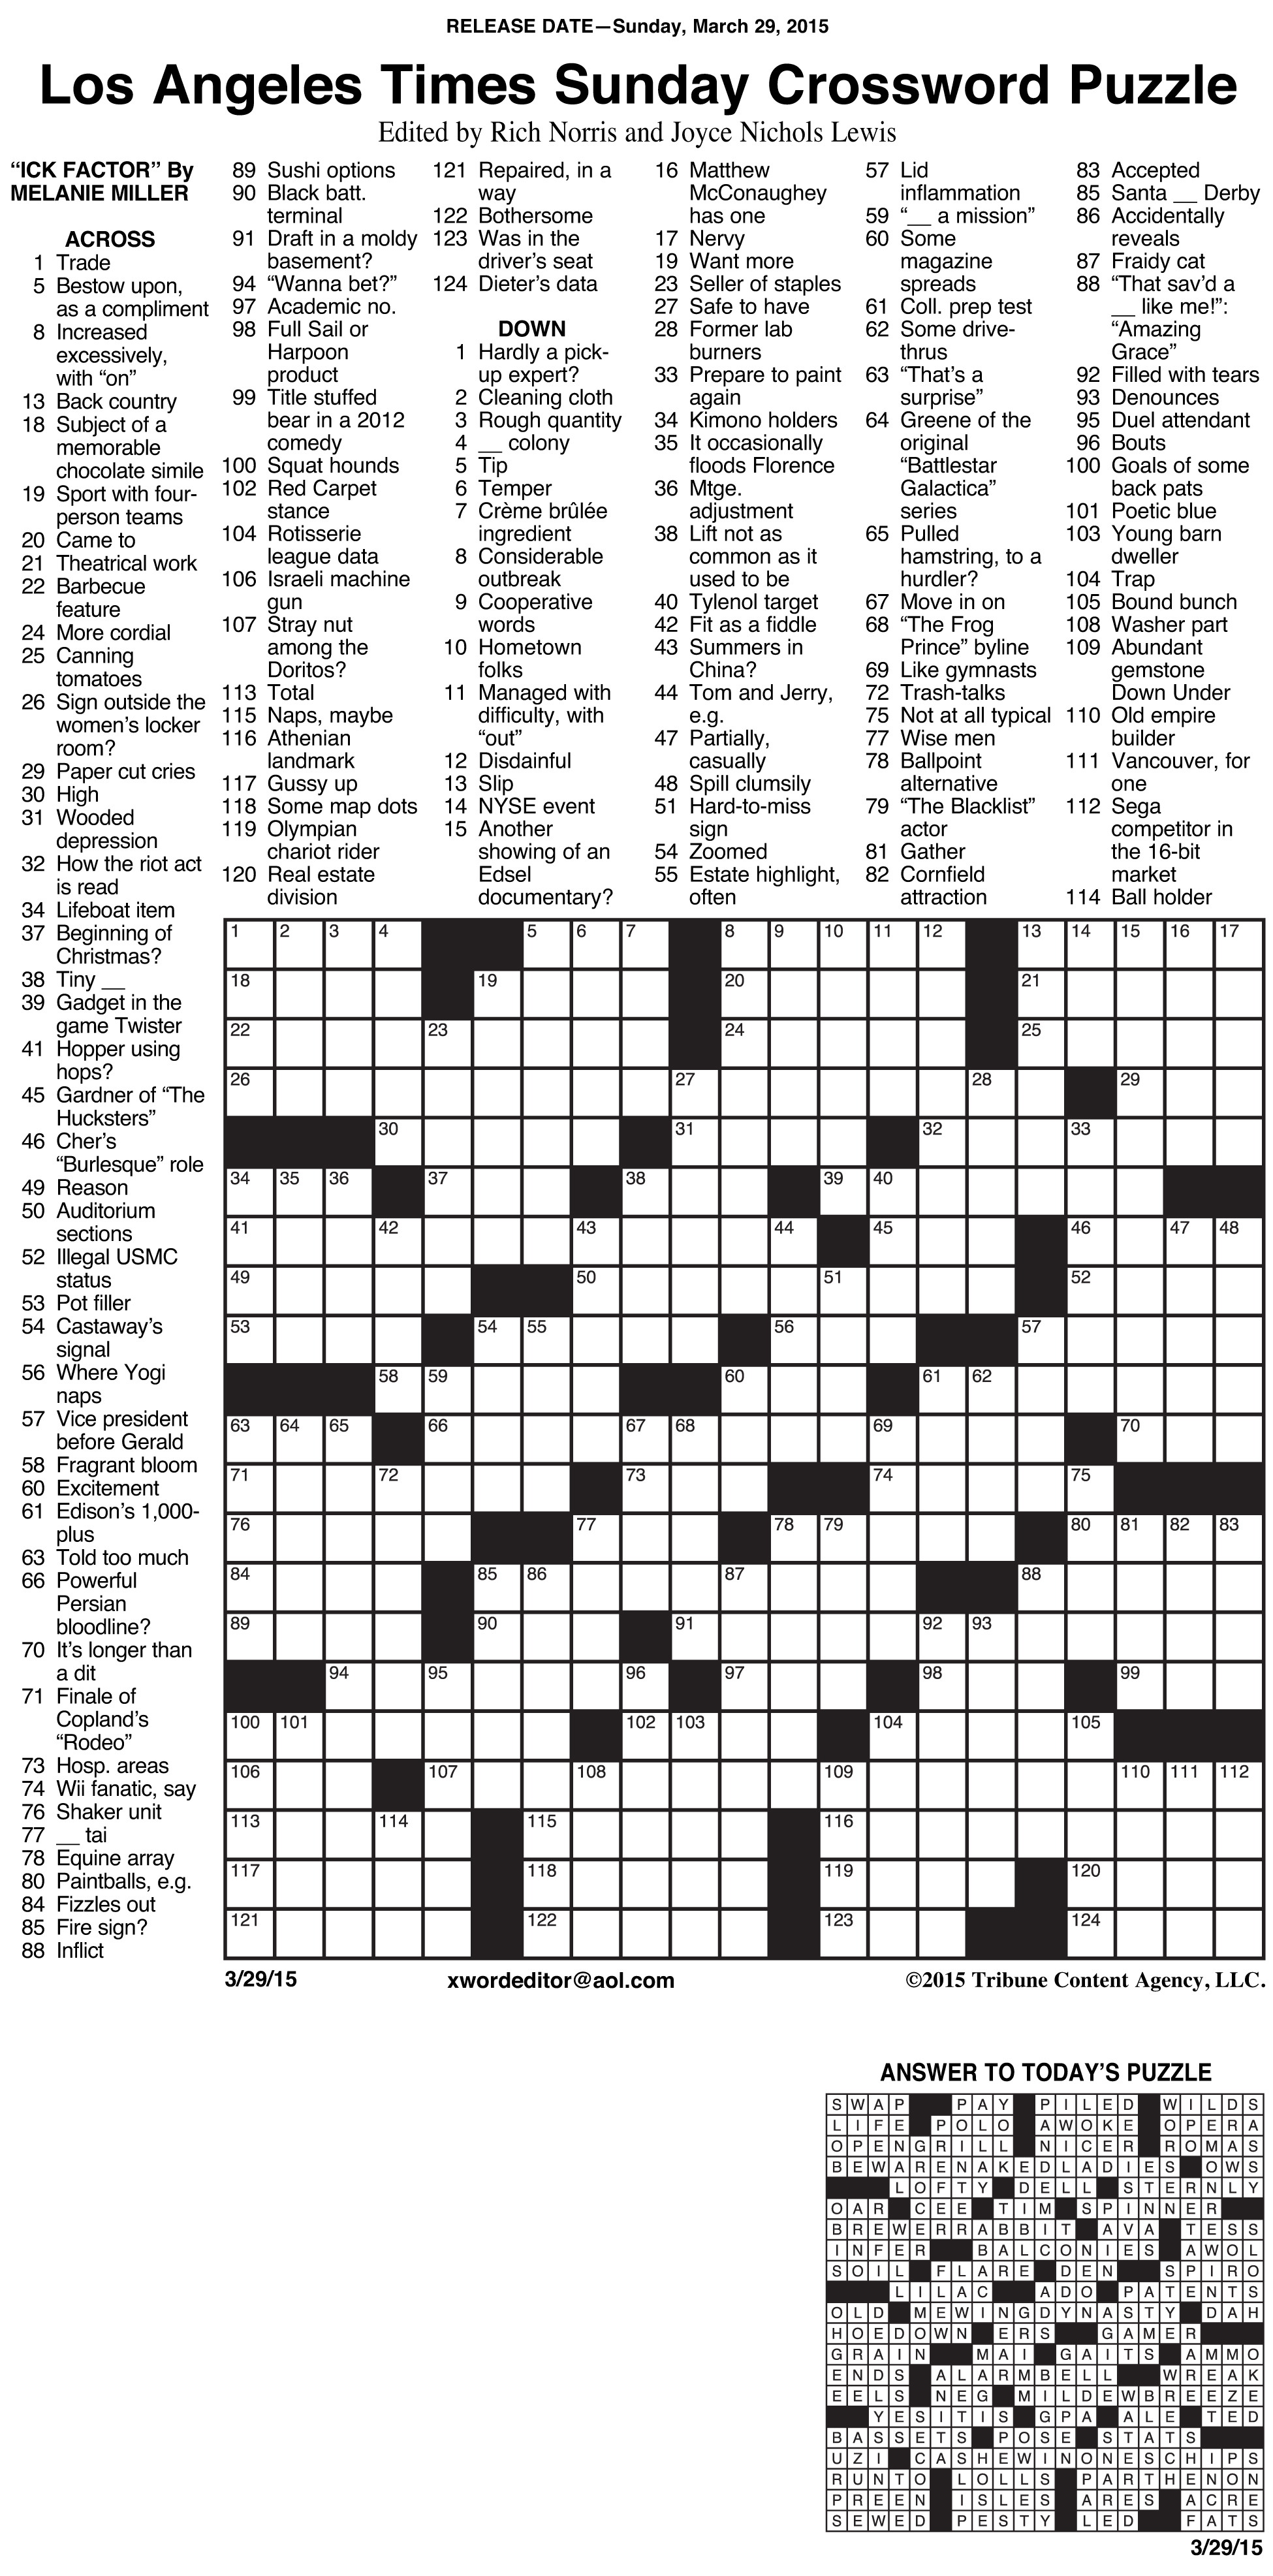 Sample Of Los Angeles Times Sunday Crossword Puzzle | Tribune - Chicago Sun Times Crossword Puzzle Printable